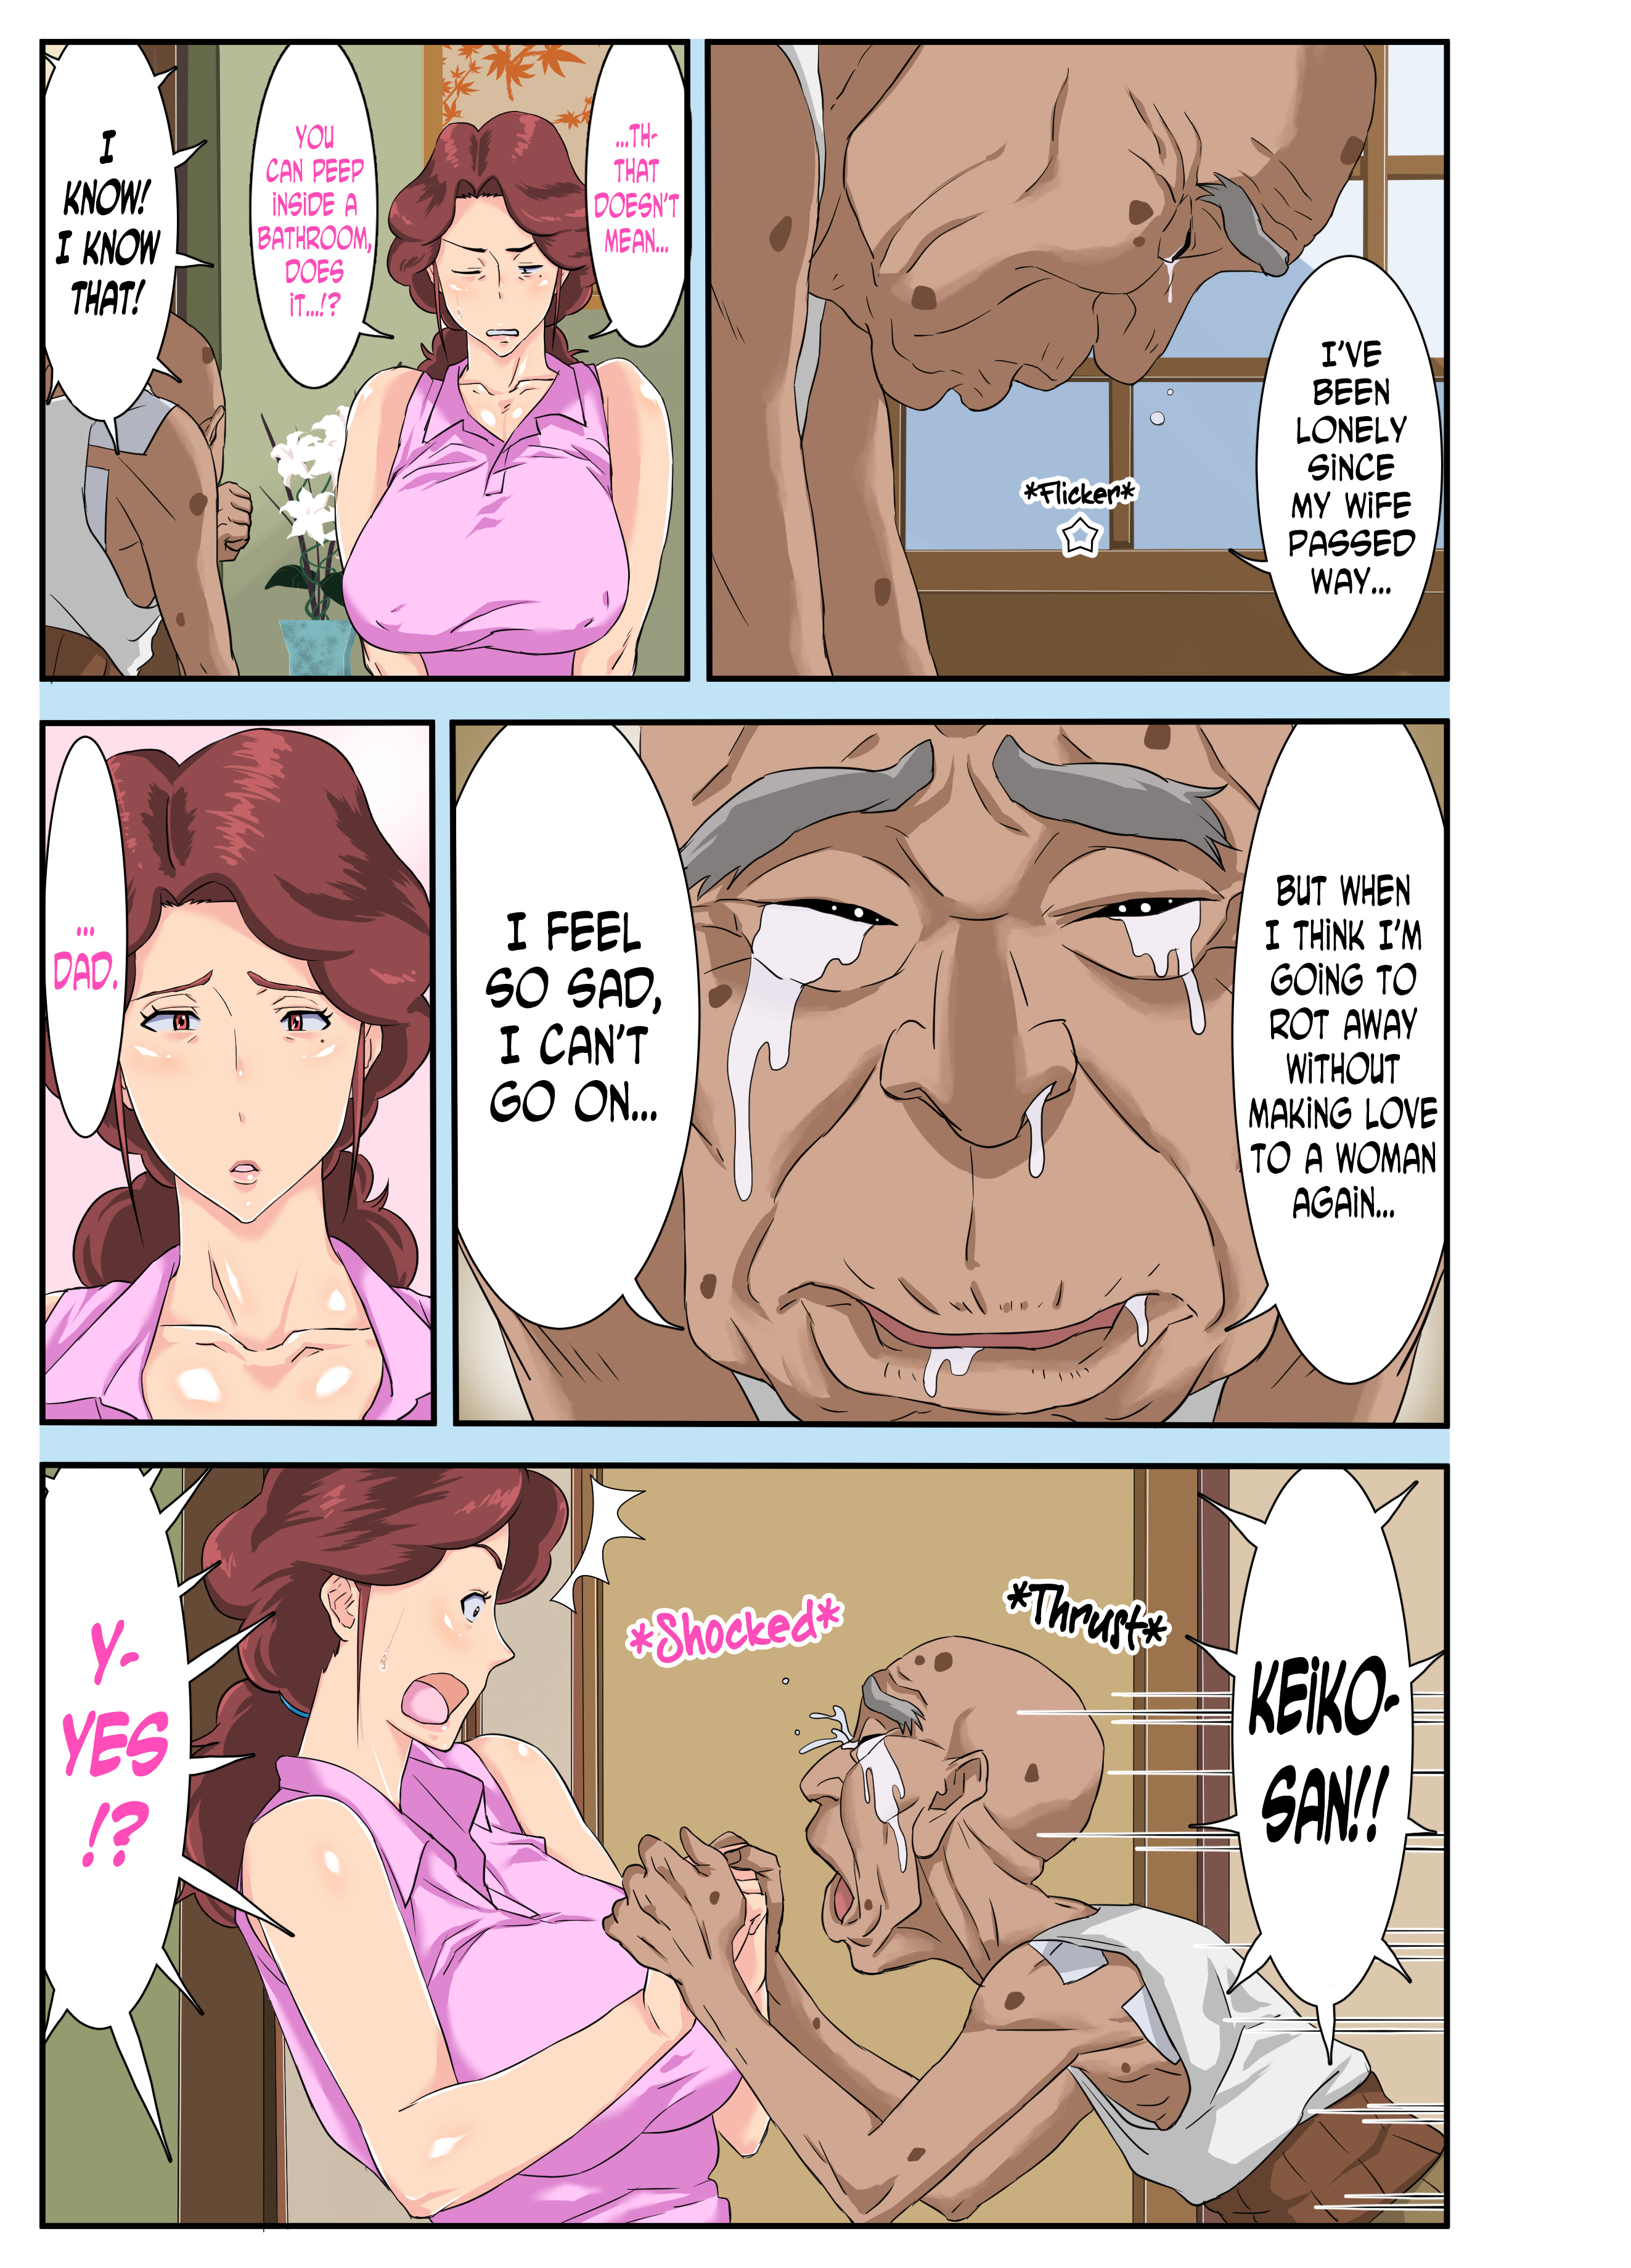 Dirty old man fucks his busty daughter while her husband sleeps - sex comics photo picture photo